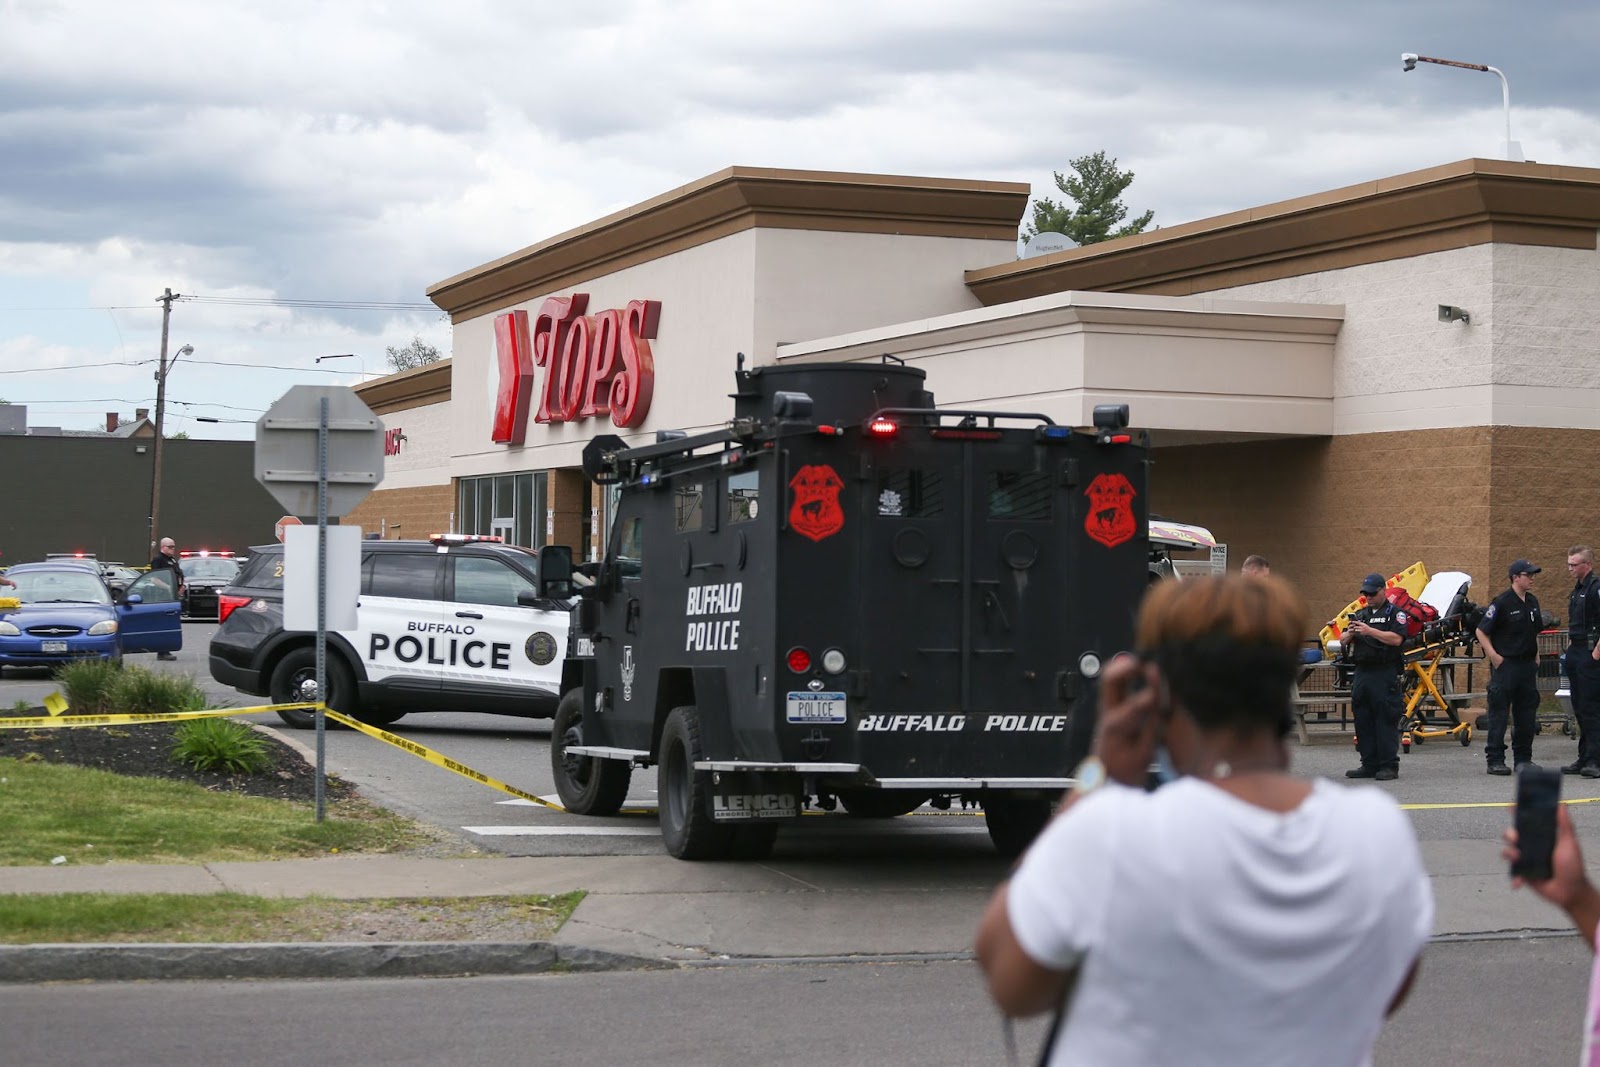 10 Killed And 3 Injured In Racially Motivated Mass Shooting At Tops Supermarket In Buffalo My Beautiful Black Ancestry